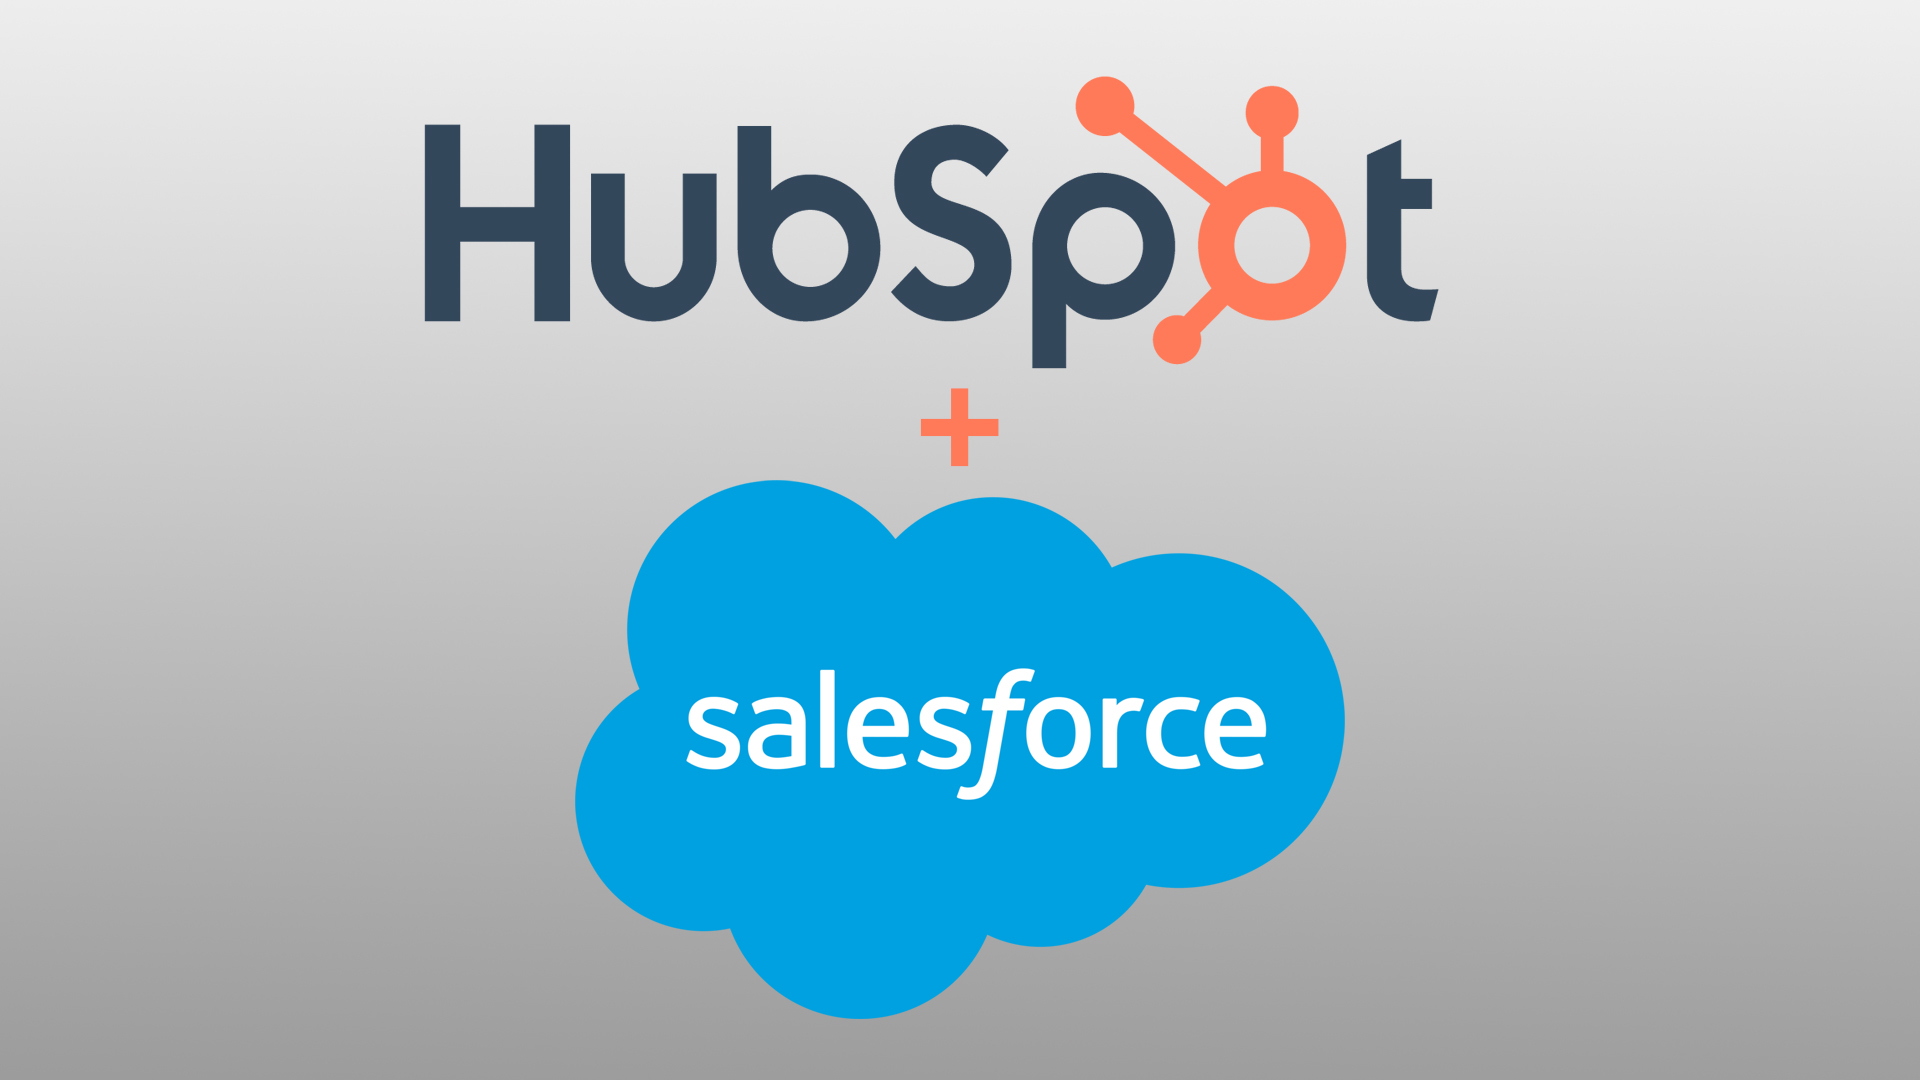 hubspot and salesforce icons